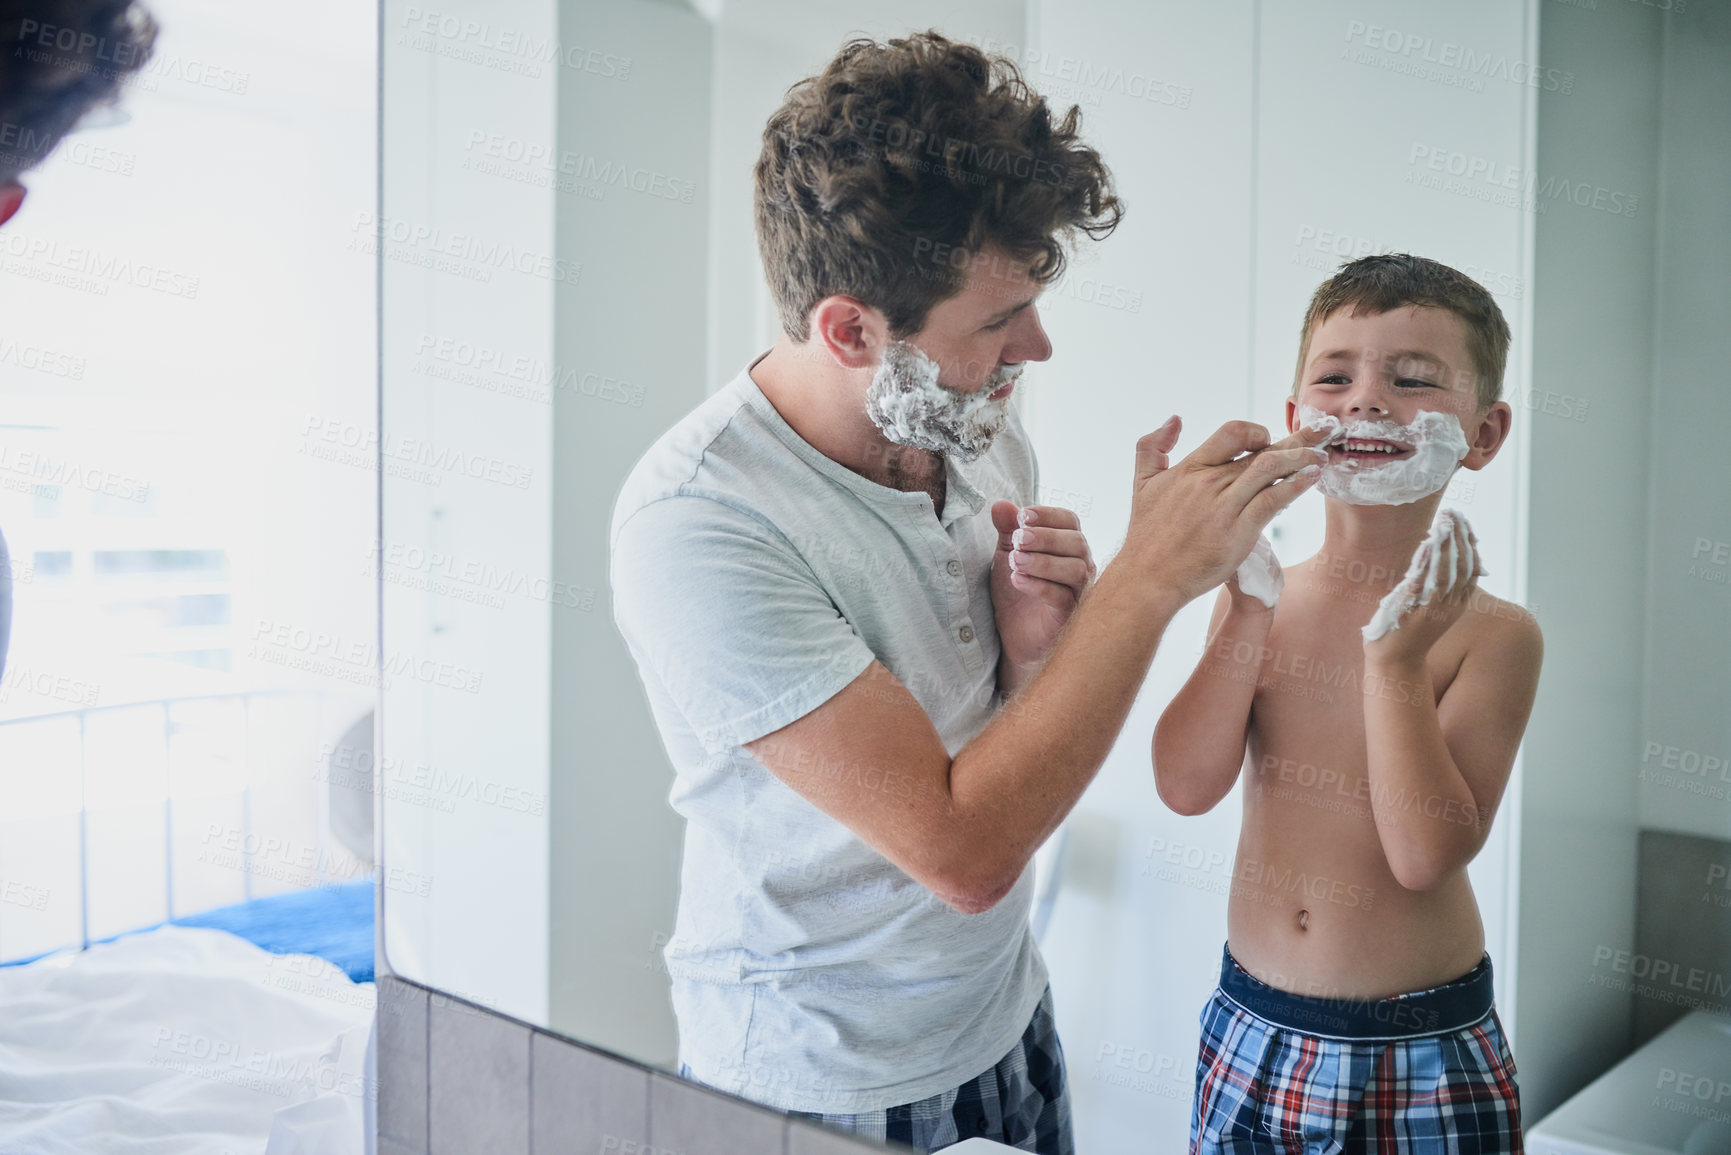 Buy stock photo Father, child and learning to shave in bathroom, having fun or bonding together. Smile, dad and teach kid with shaving cream on face, playing or cleaning, hygiene or enjoying hair removal with care.